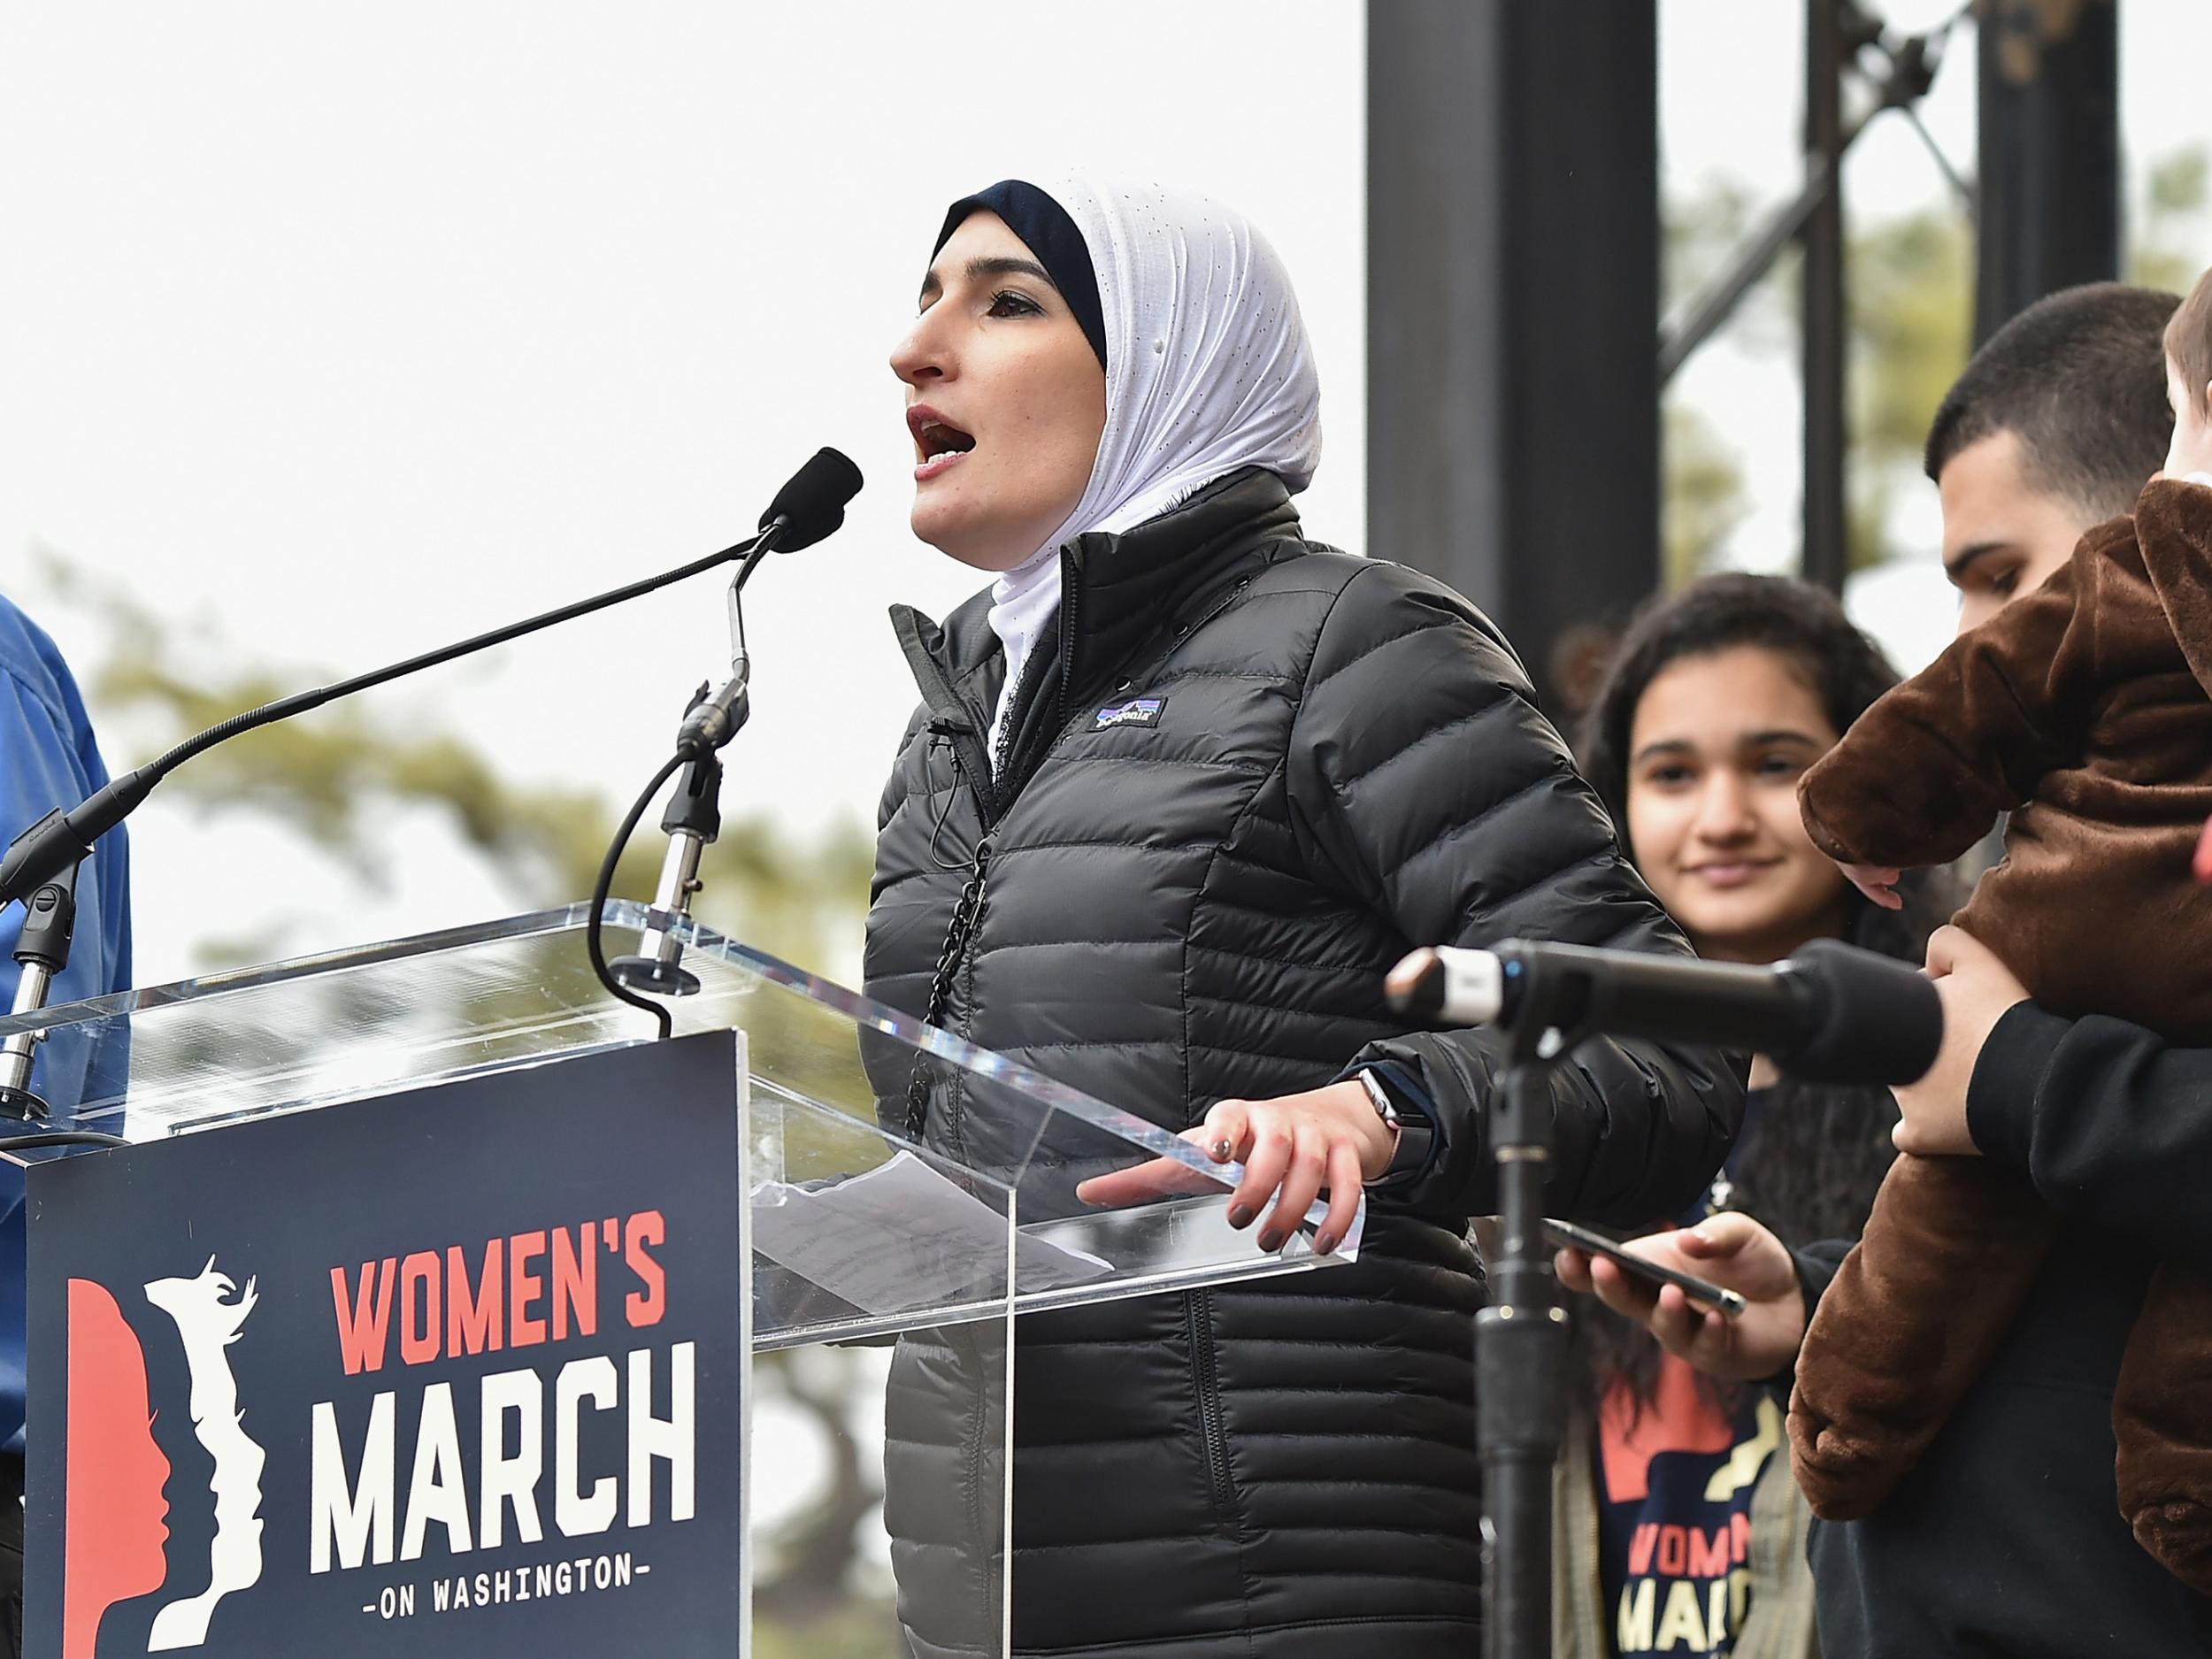 Linda Sarsour's speech urged Muslims to speak out against oppression 